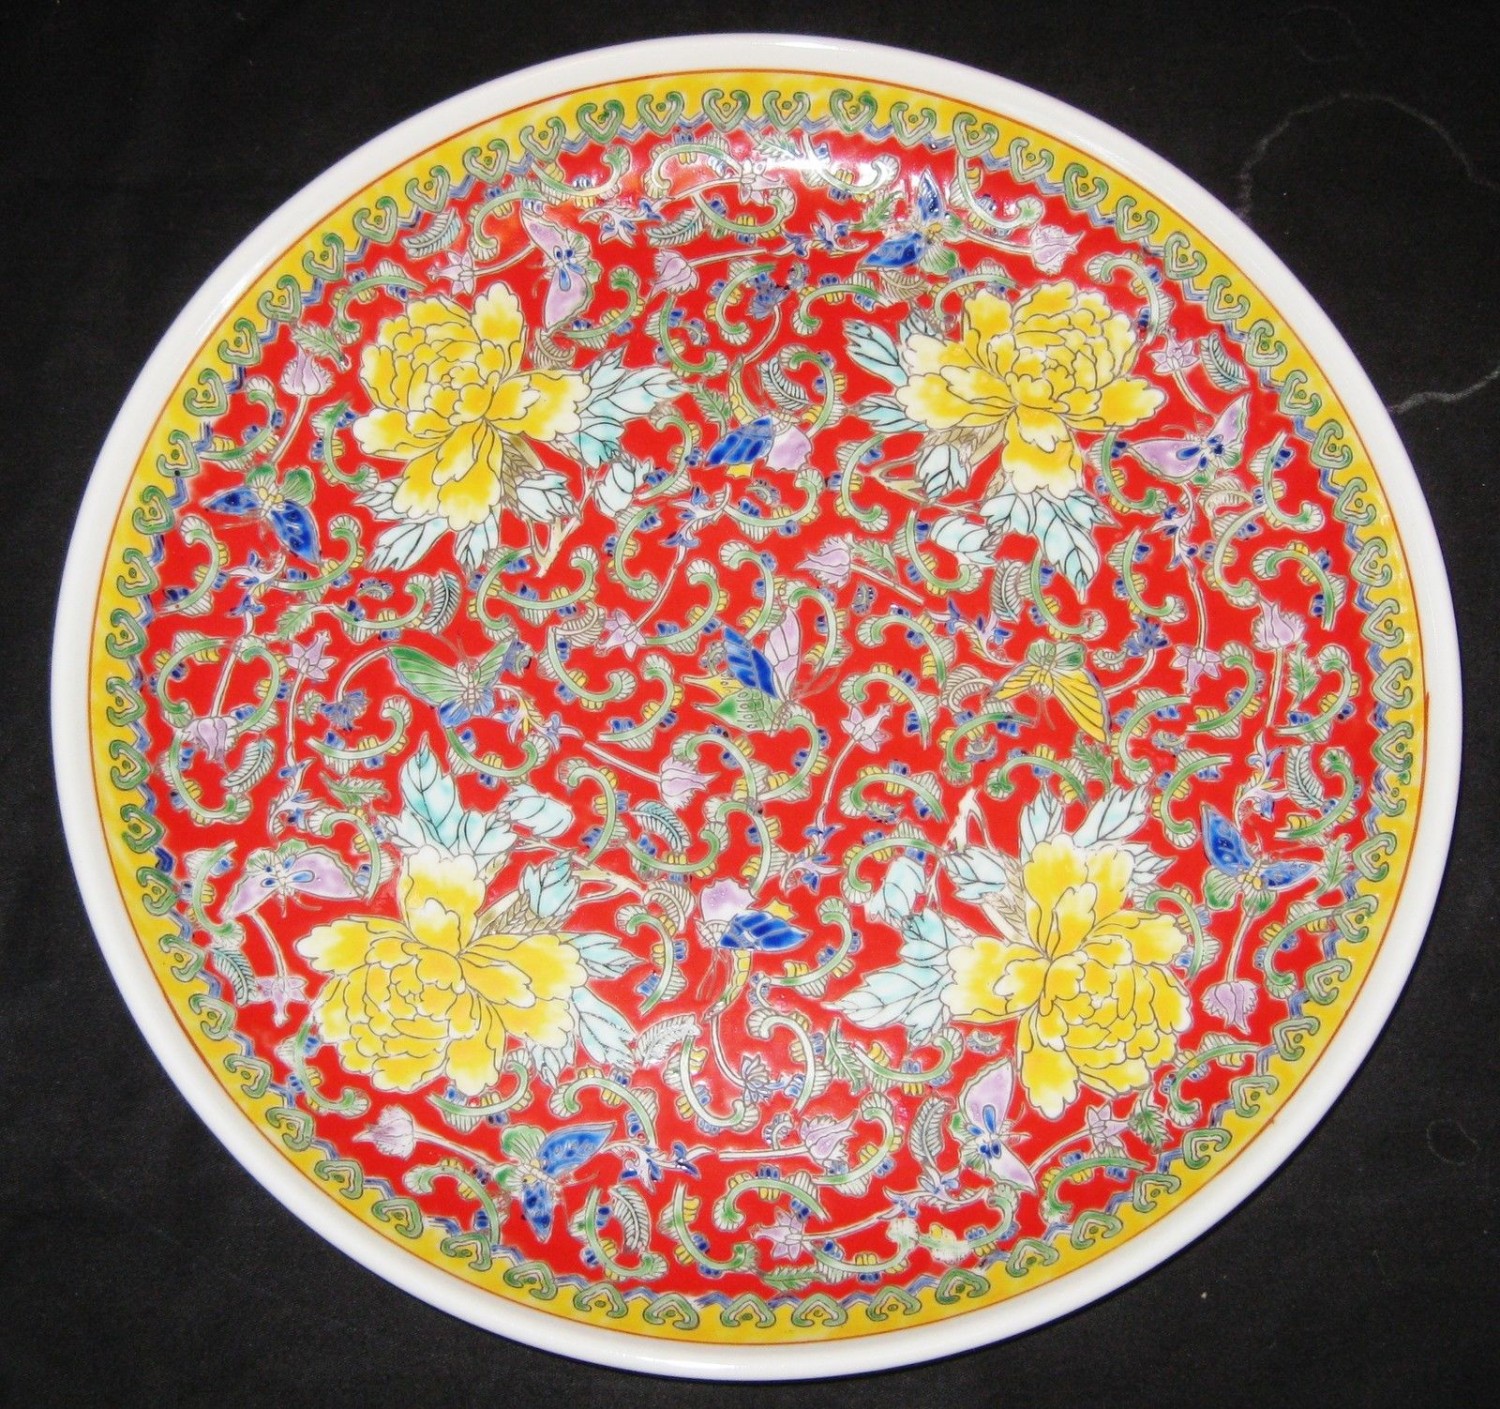 ANTIQUE CHINESE FAMILLE ROSE PORCELAIN CHARGER PLATE,19TH C., QIANLONG MARK, NR.